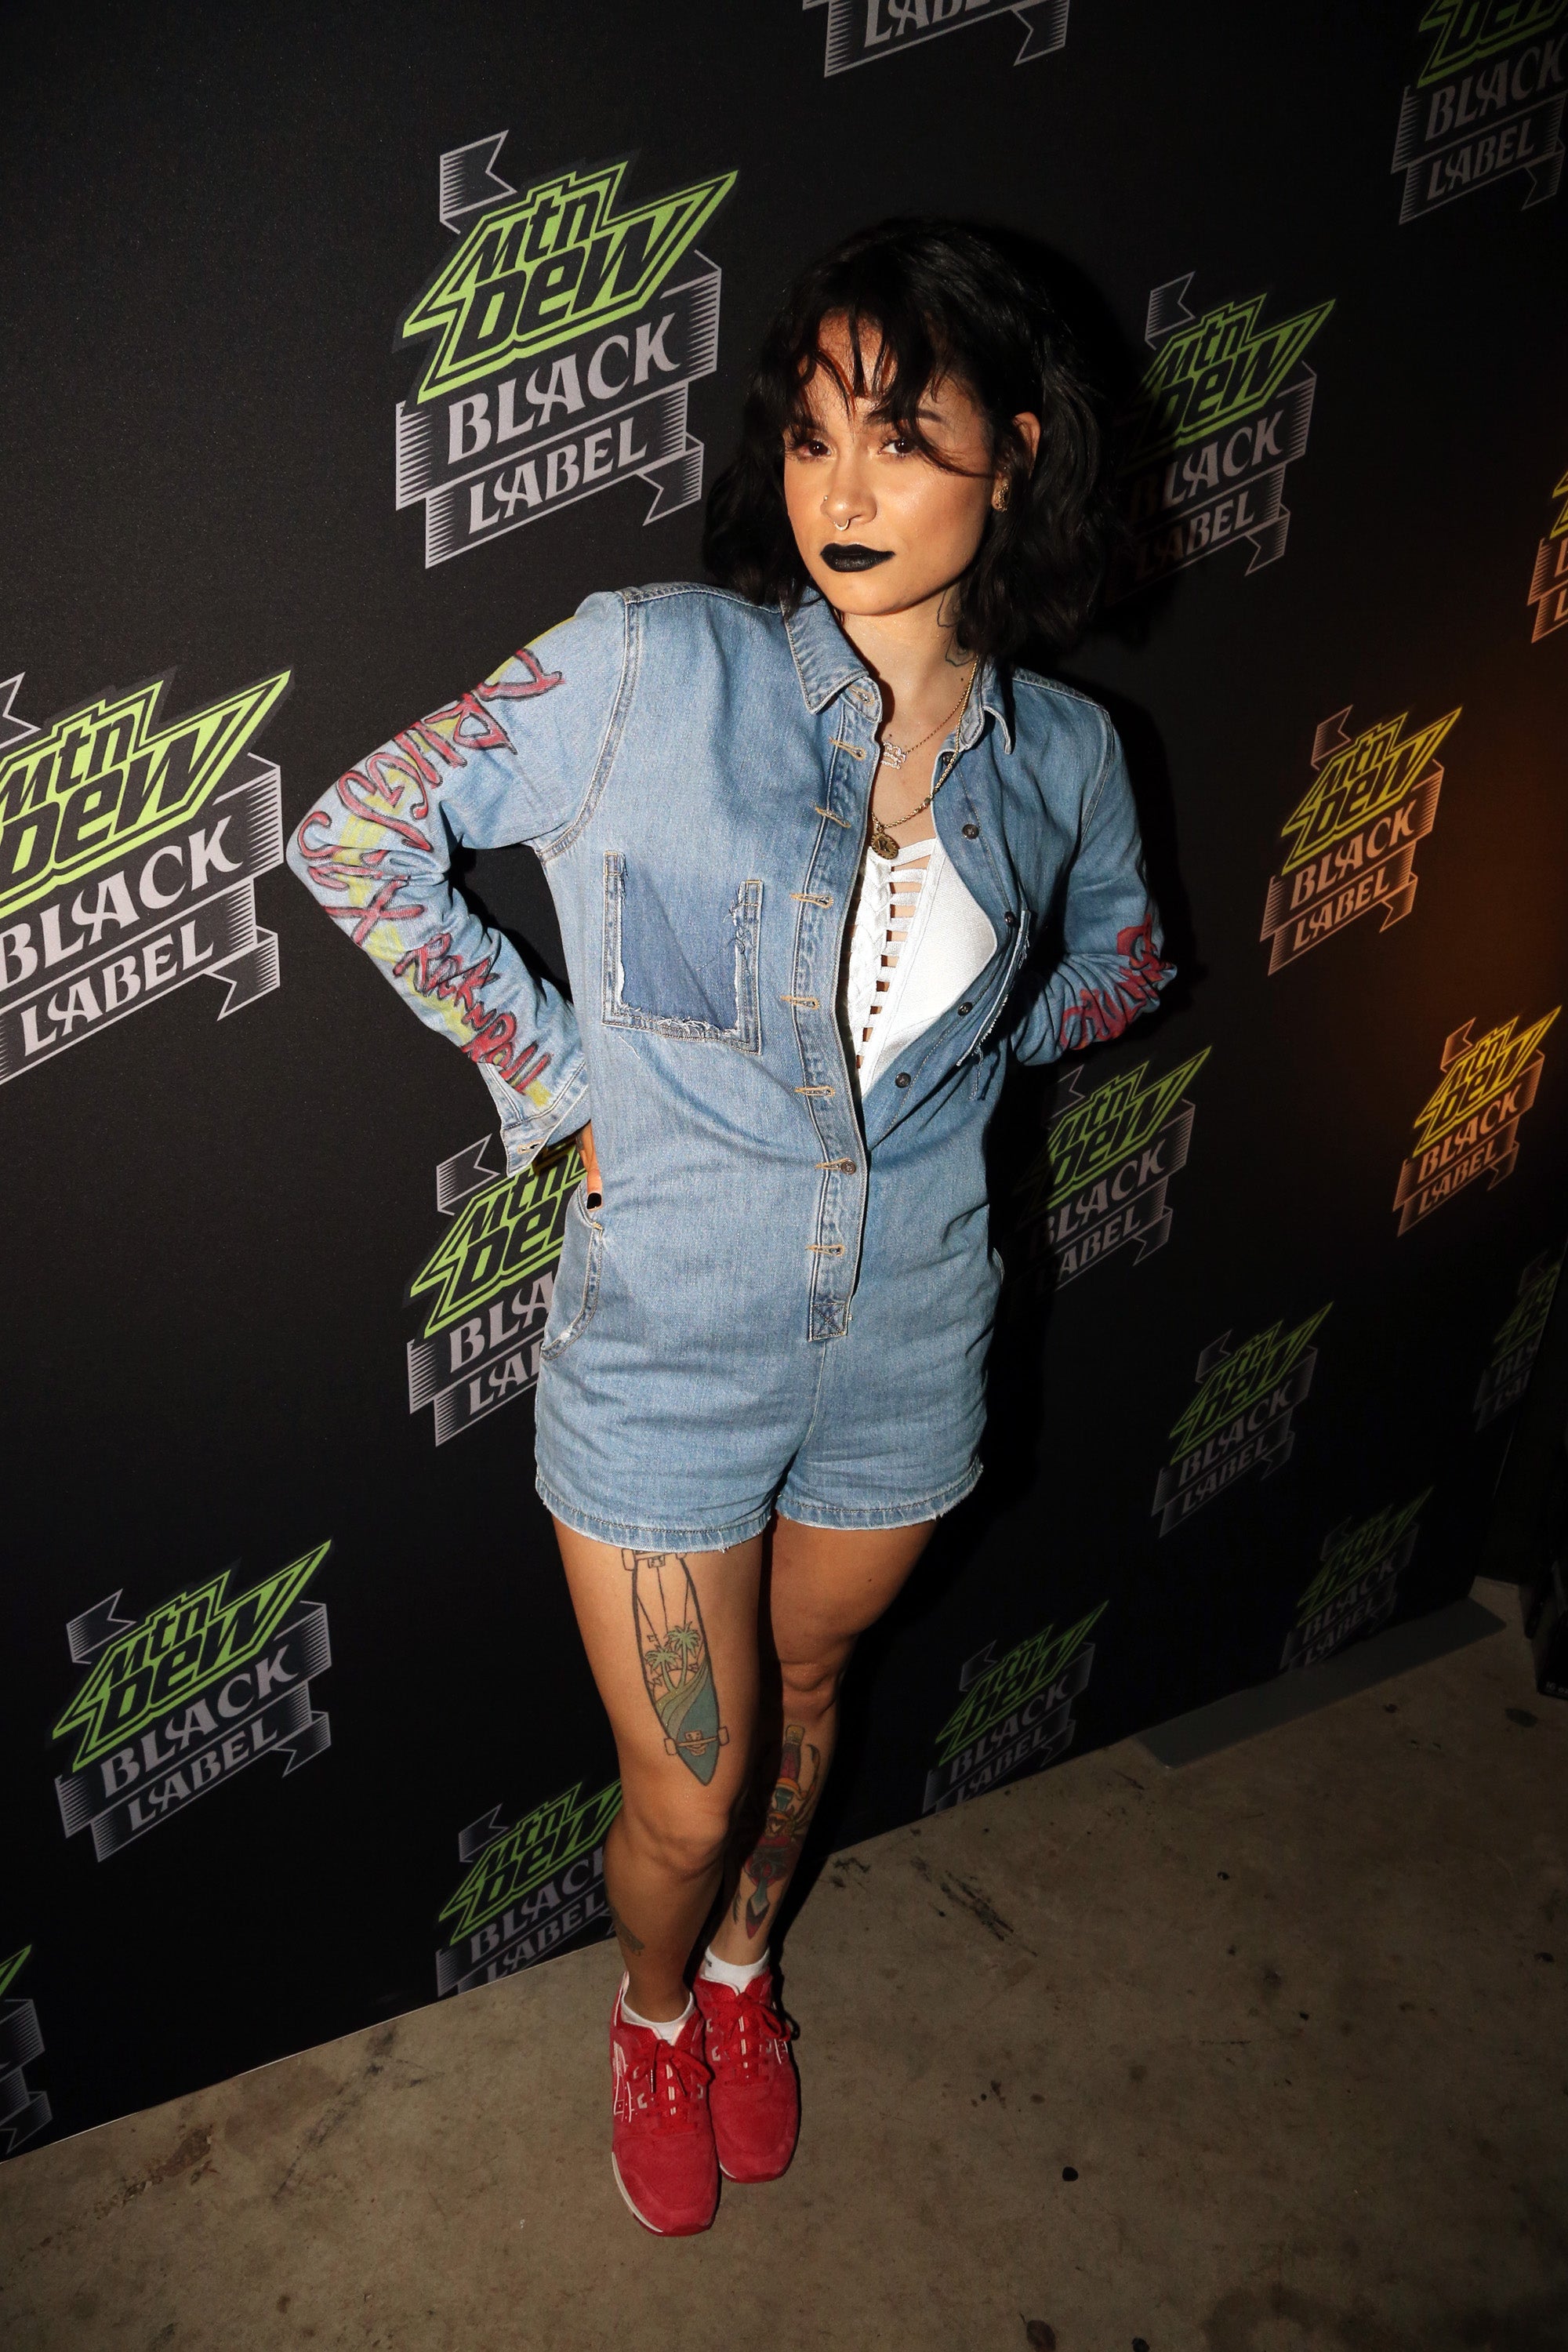 15 Photos That Prove Kehlani's Style is the Epitome of Tomboy Chic
